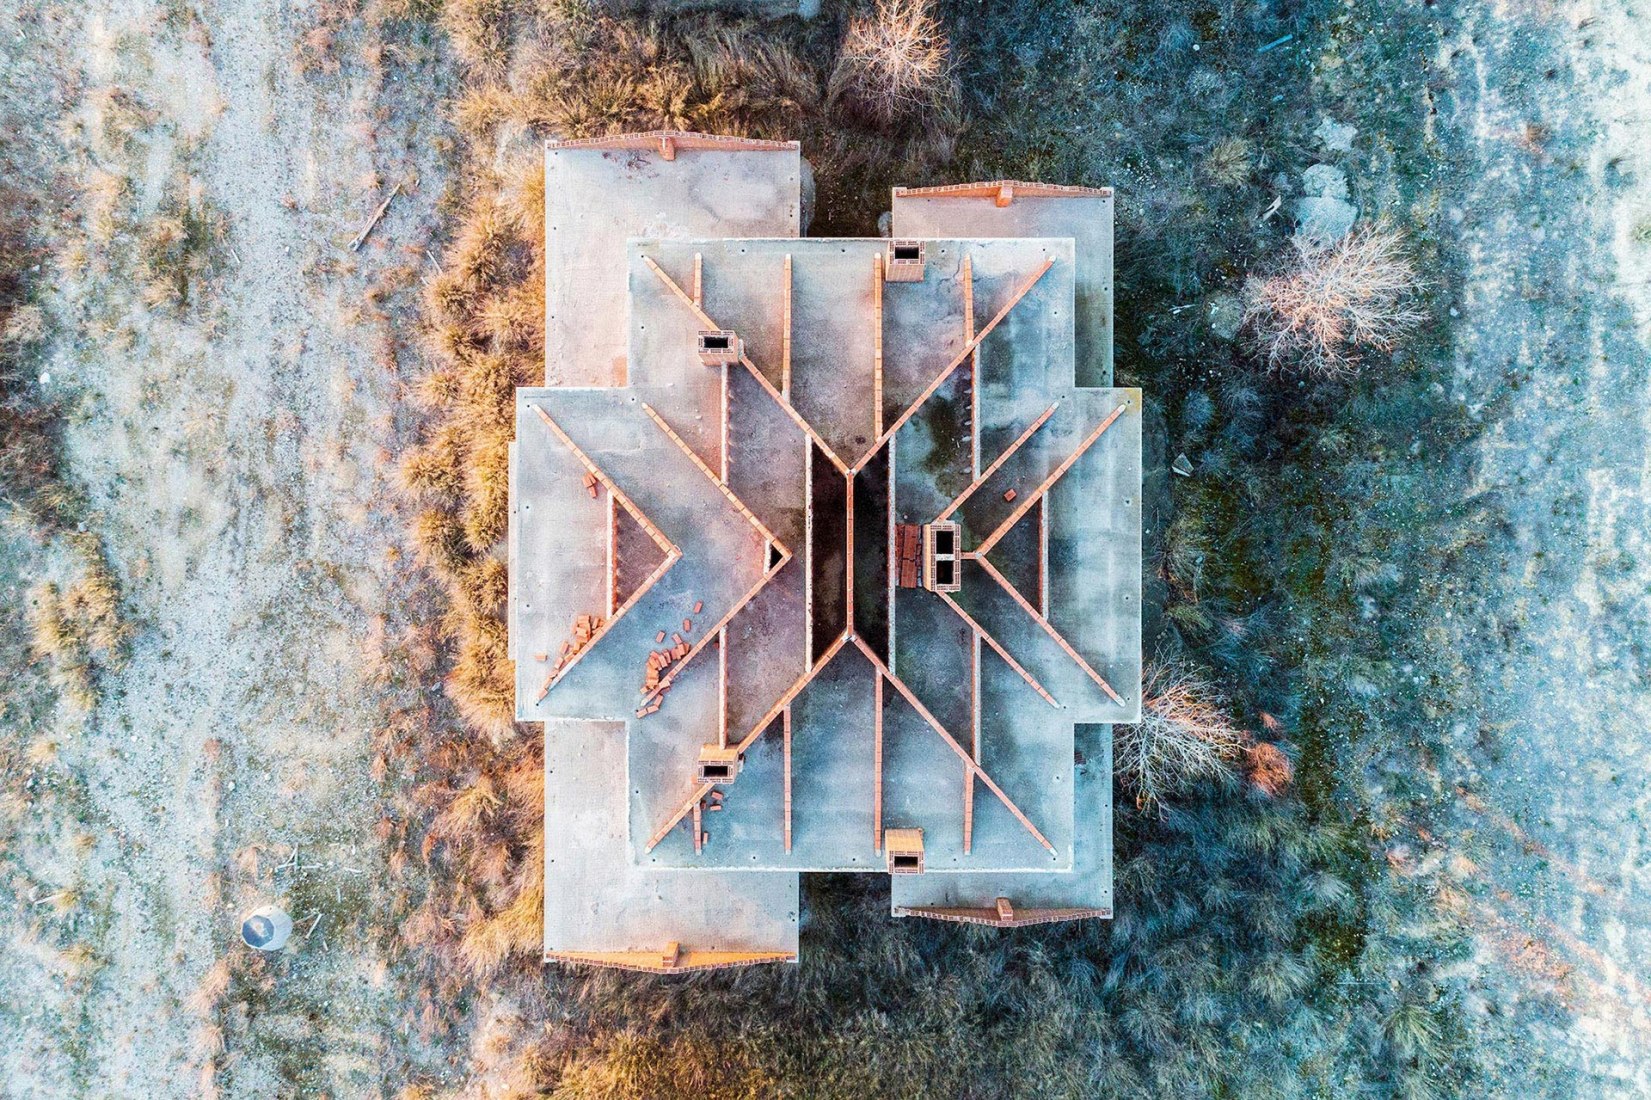 Sand Castles (part II). Winners of DJI Drone Photography Award. Spain’s abandoned houses and the European salt ponds. Photograph © Markel Redondo